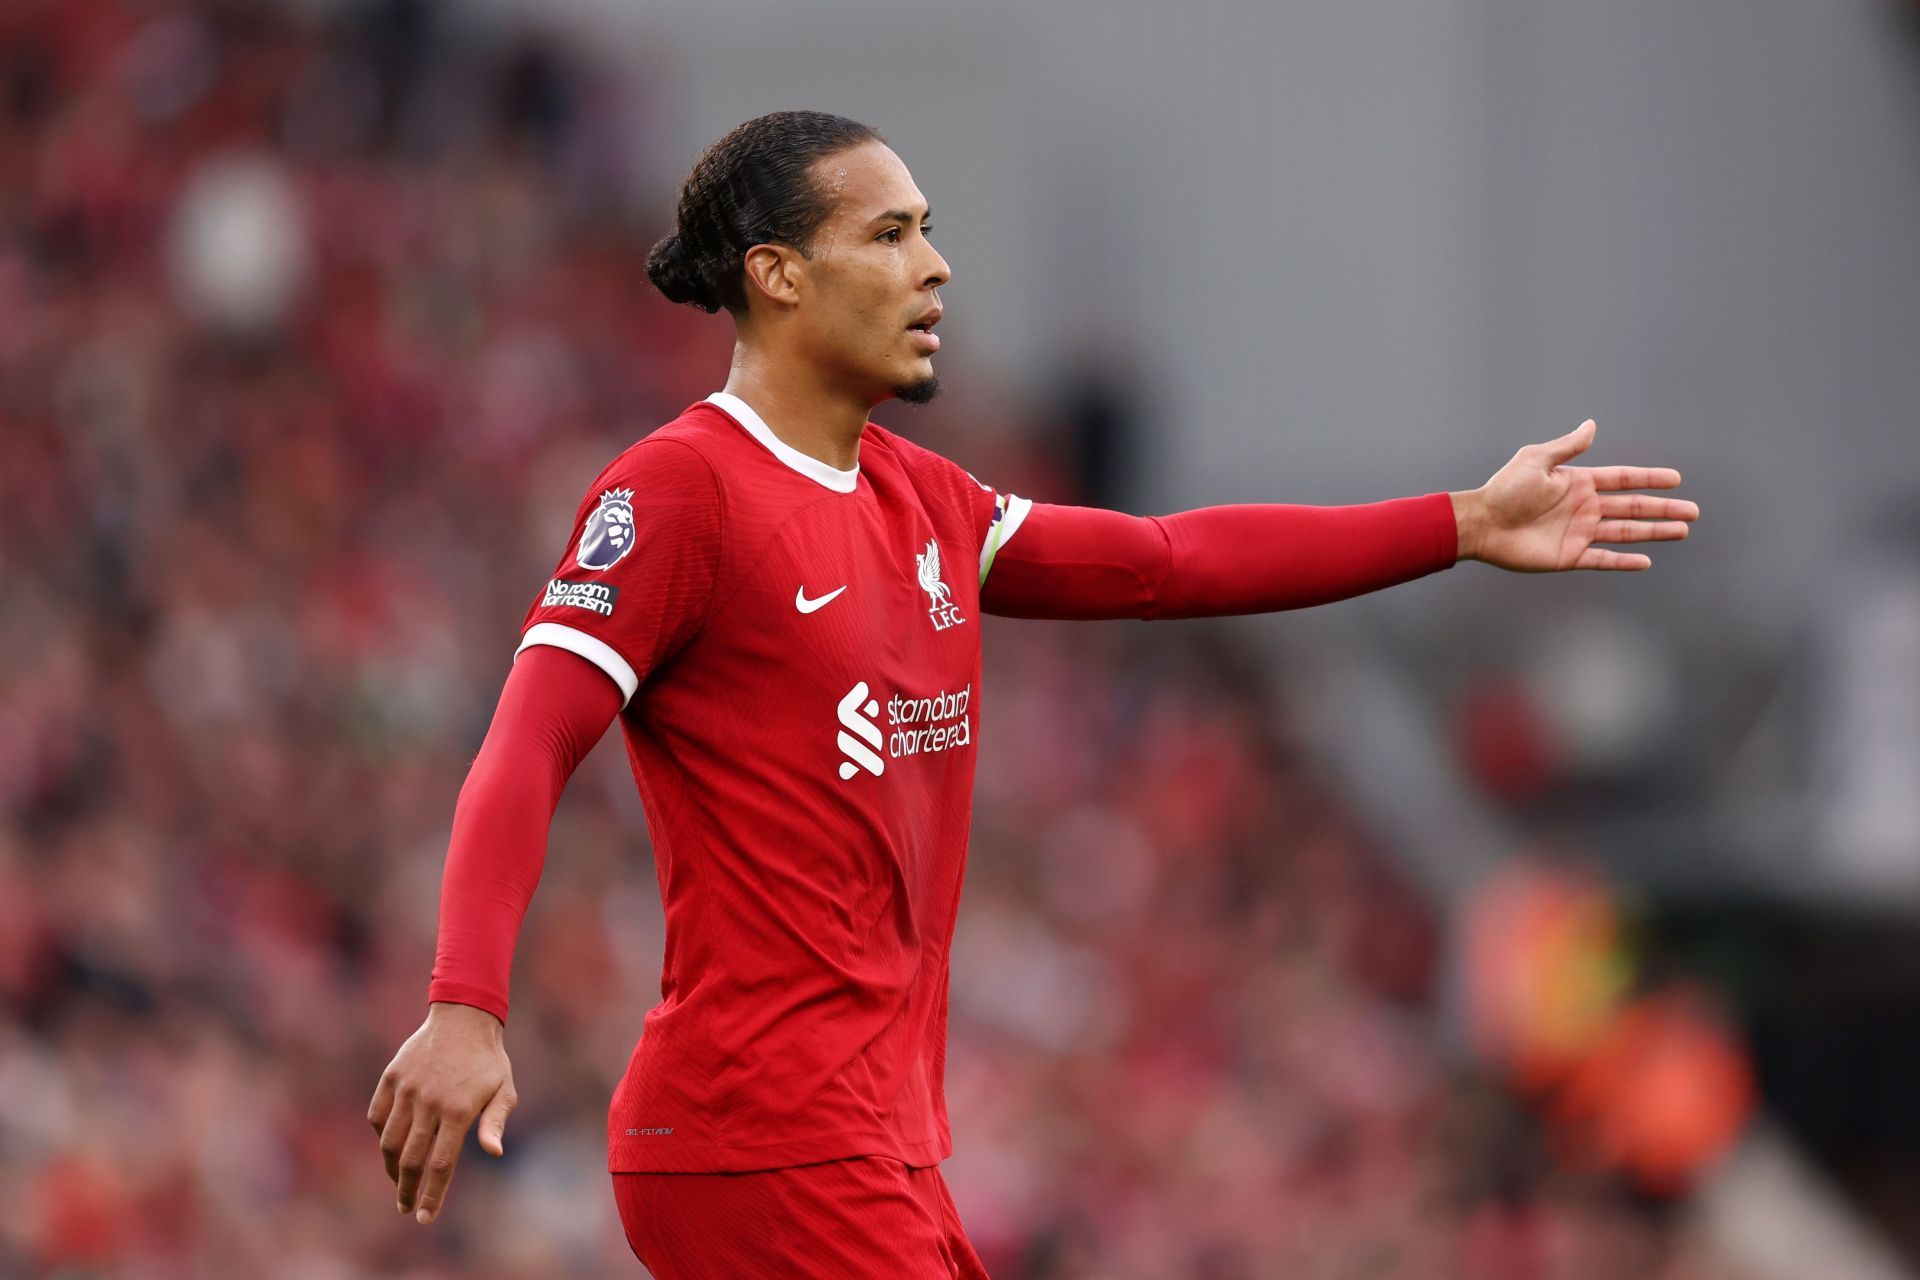 Van Dijk spoke to Gravenberch about the Anfield outfit.